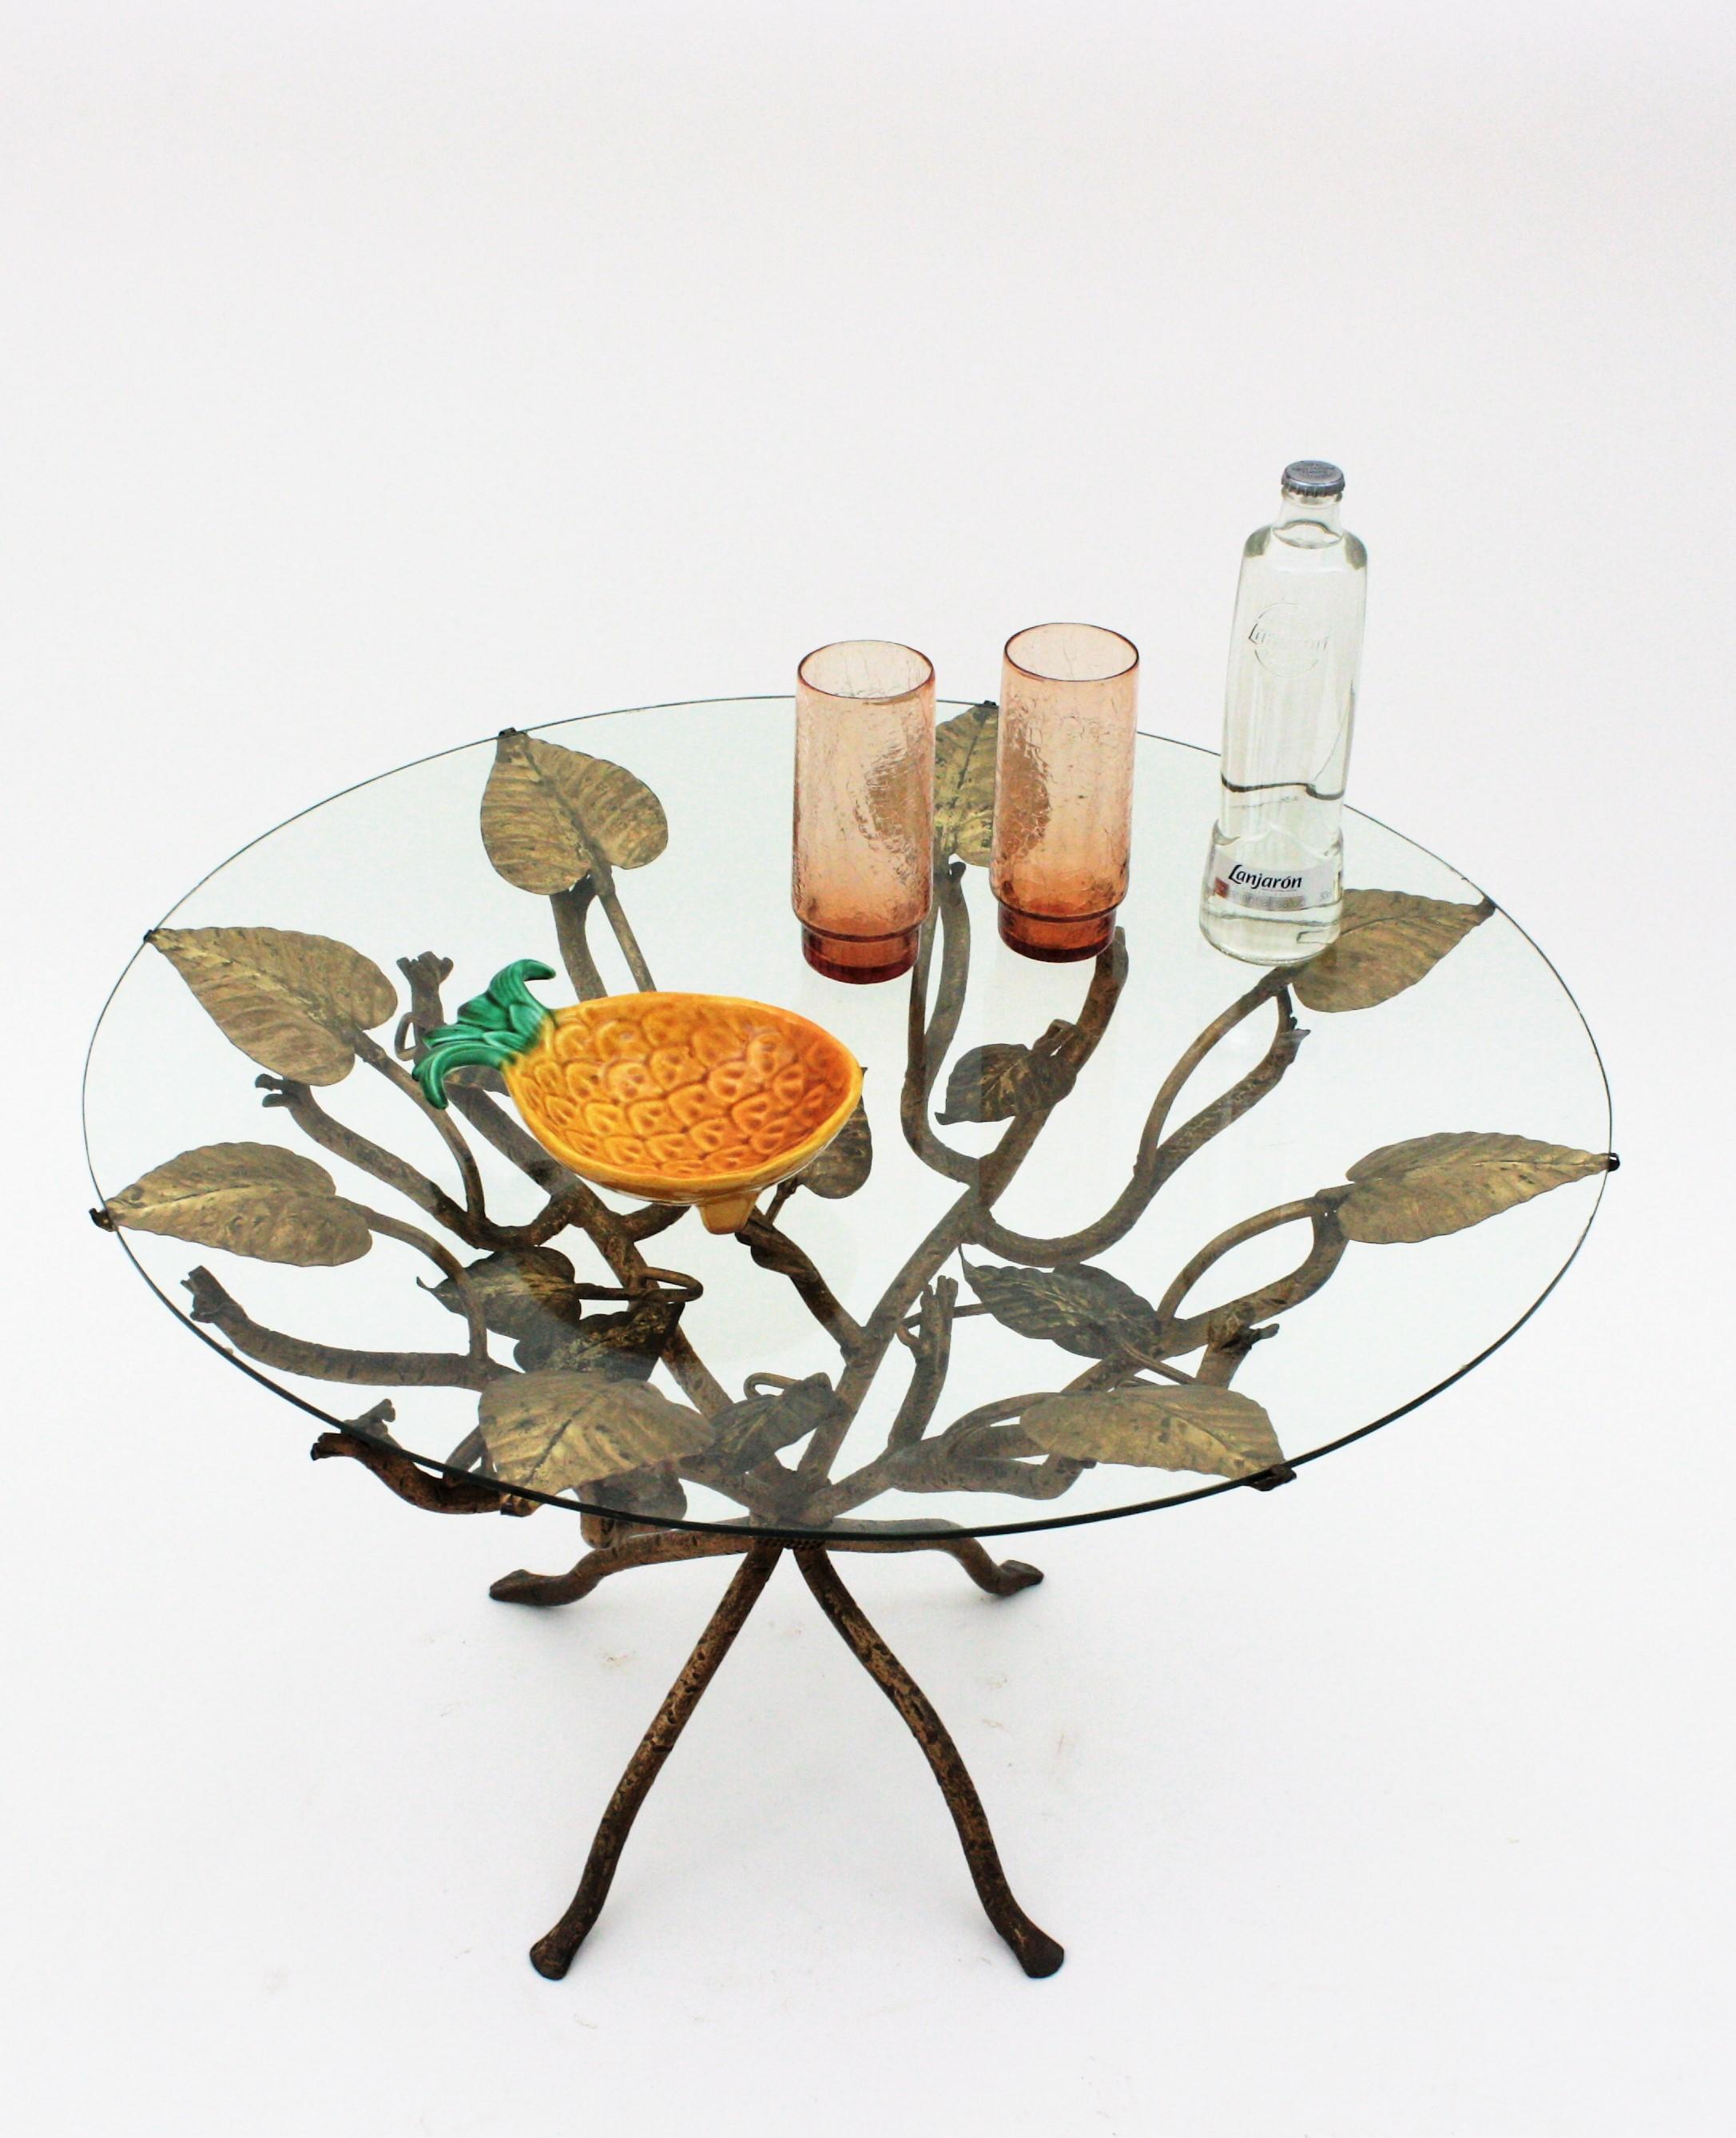 Coffee table / Low Table / Side Table with Foliage design,  wrought iron, gold leaf, France, 1950s.
One of a kind Hollywood Regency coffee table or side table with naturalistic design. This table features an intricante of branches and leaves